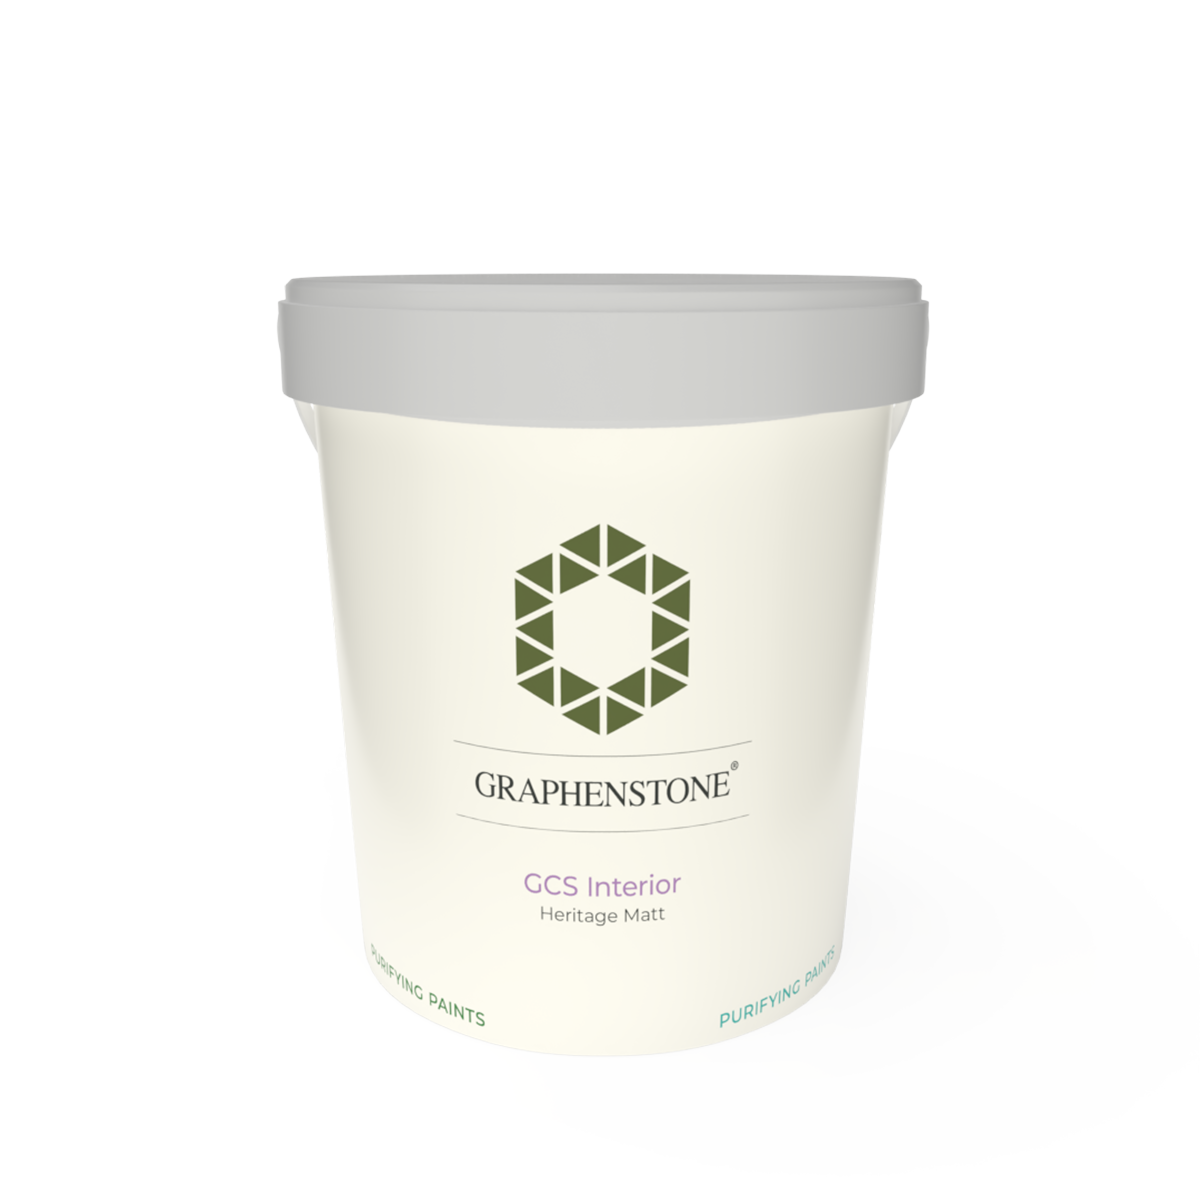 GCS Interior White – Our classic, breathable matt for heritage / listed properties, Ultra Matt finish for Lime plasters